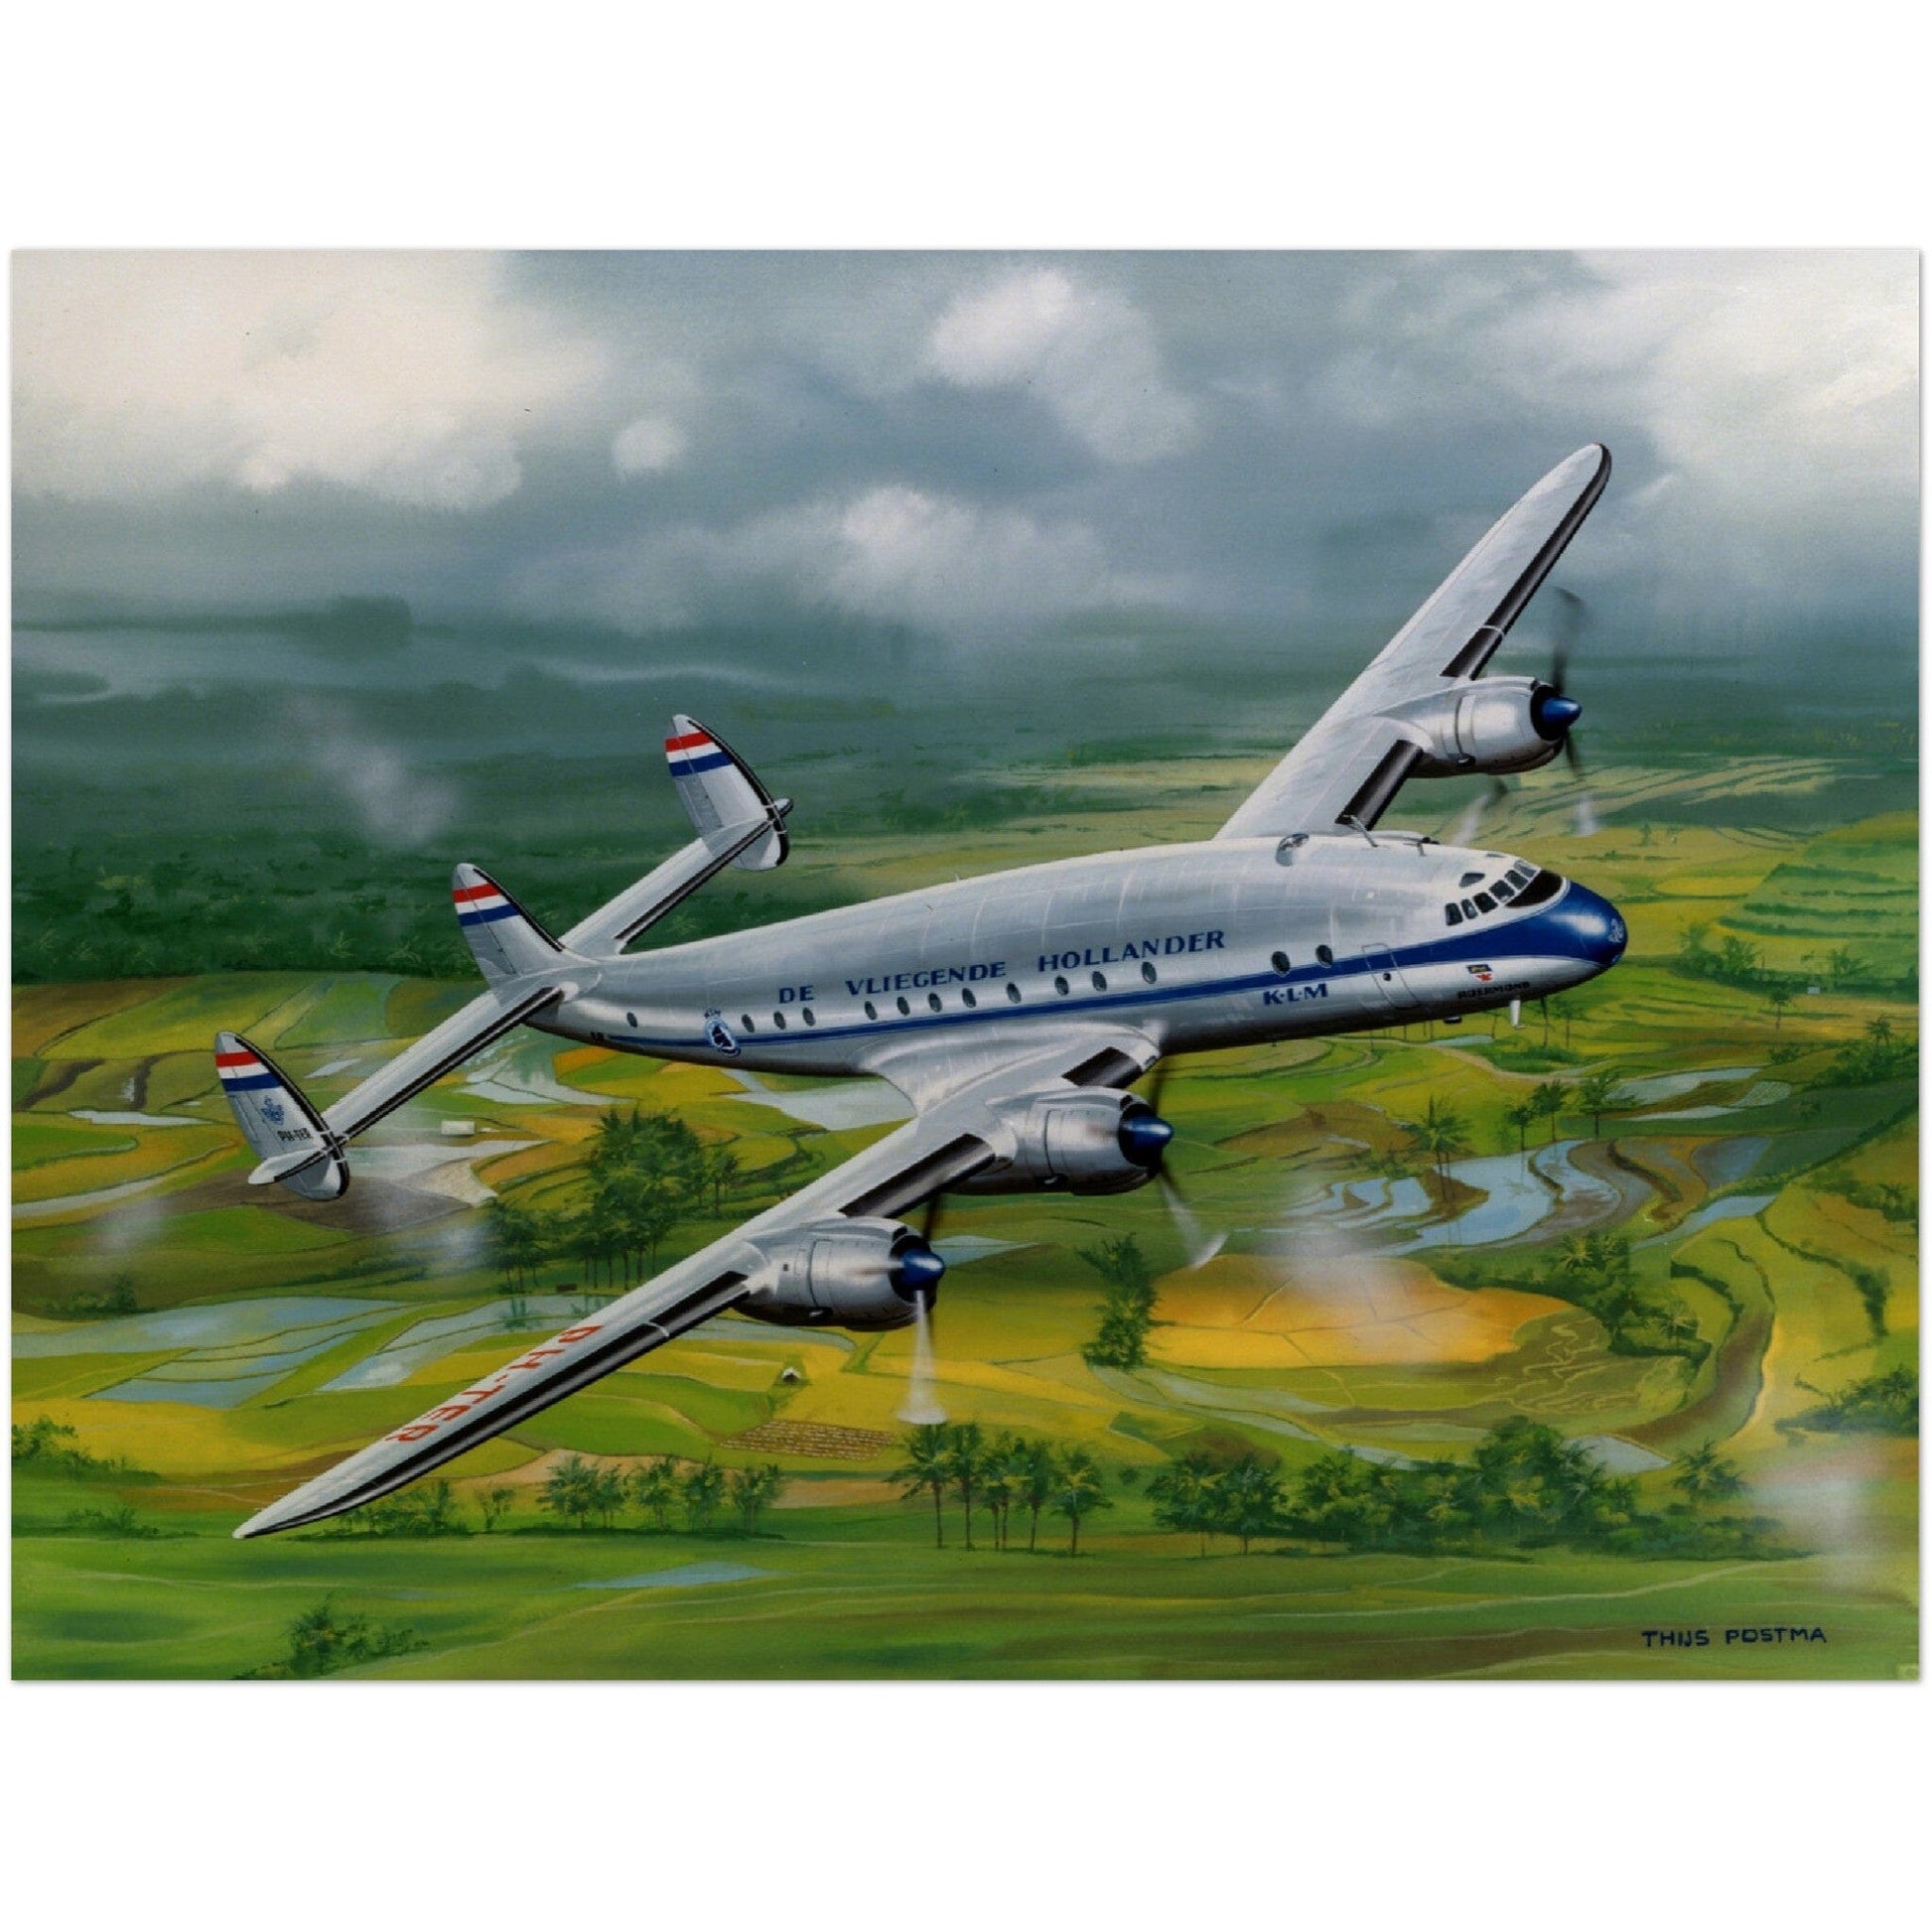 Thijs Postma - Poster - Lockheed L-749 Over Sawahs Poster Only TP Aviation Art 60x80 cm / 24x32″ 